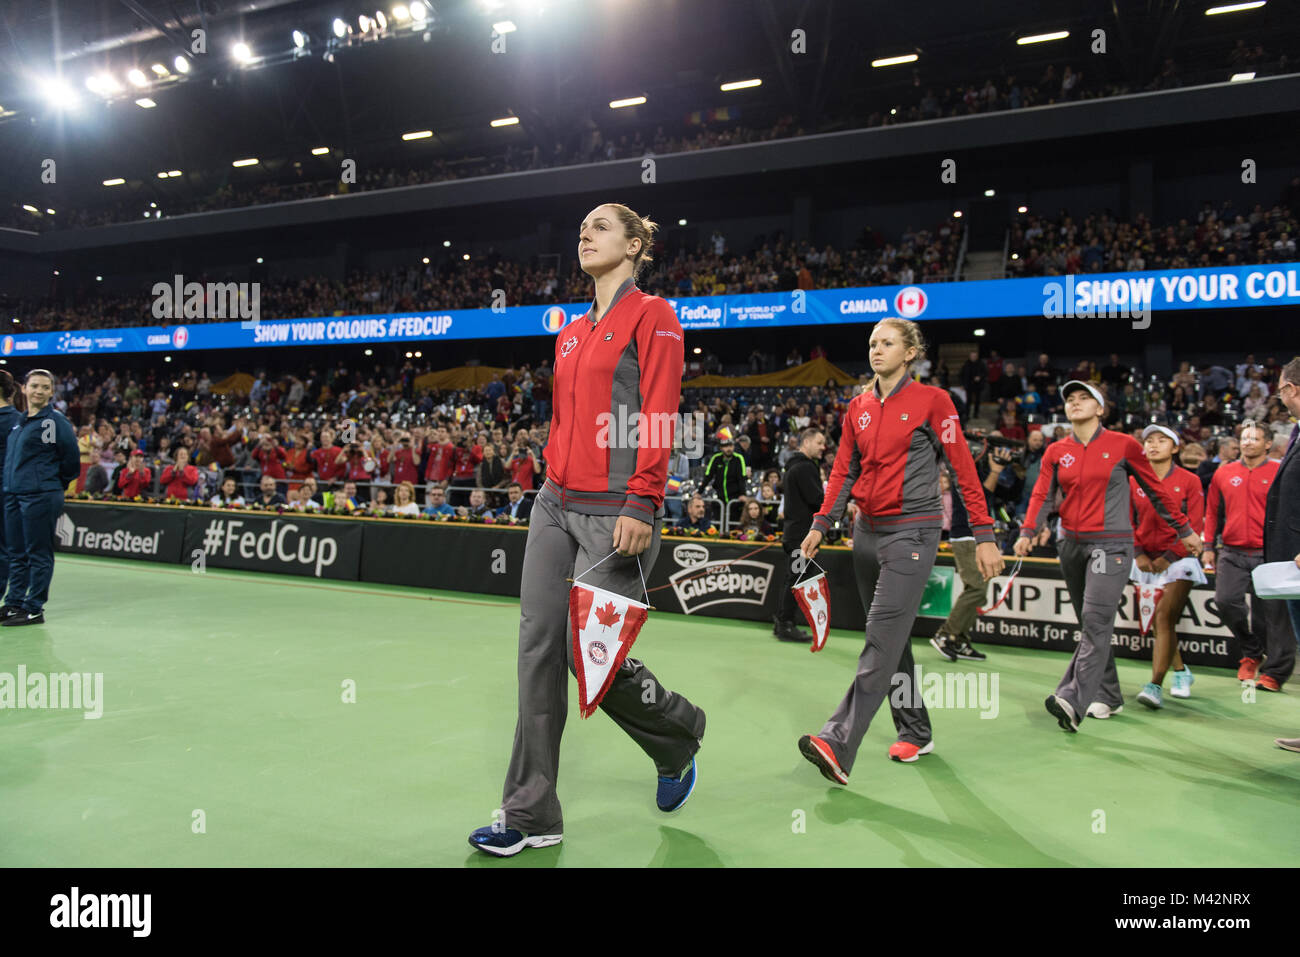 CLUJ NAPOCA, ROMANIA - FEBRUARY 10, 2018: The National Tennis Team of Canada entering the playground at the opening ceremony of Fed Cup World Group Pl Stock Photo